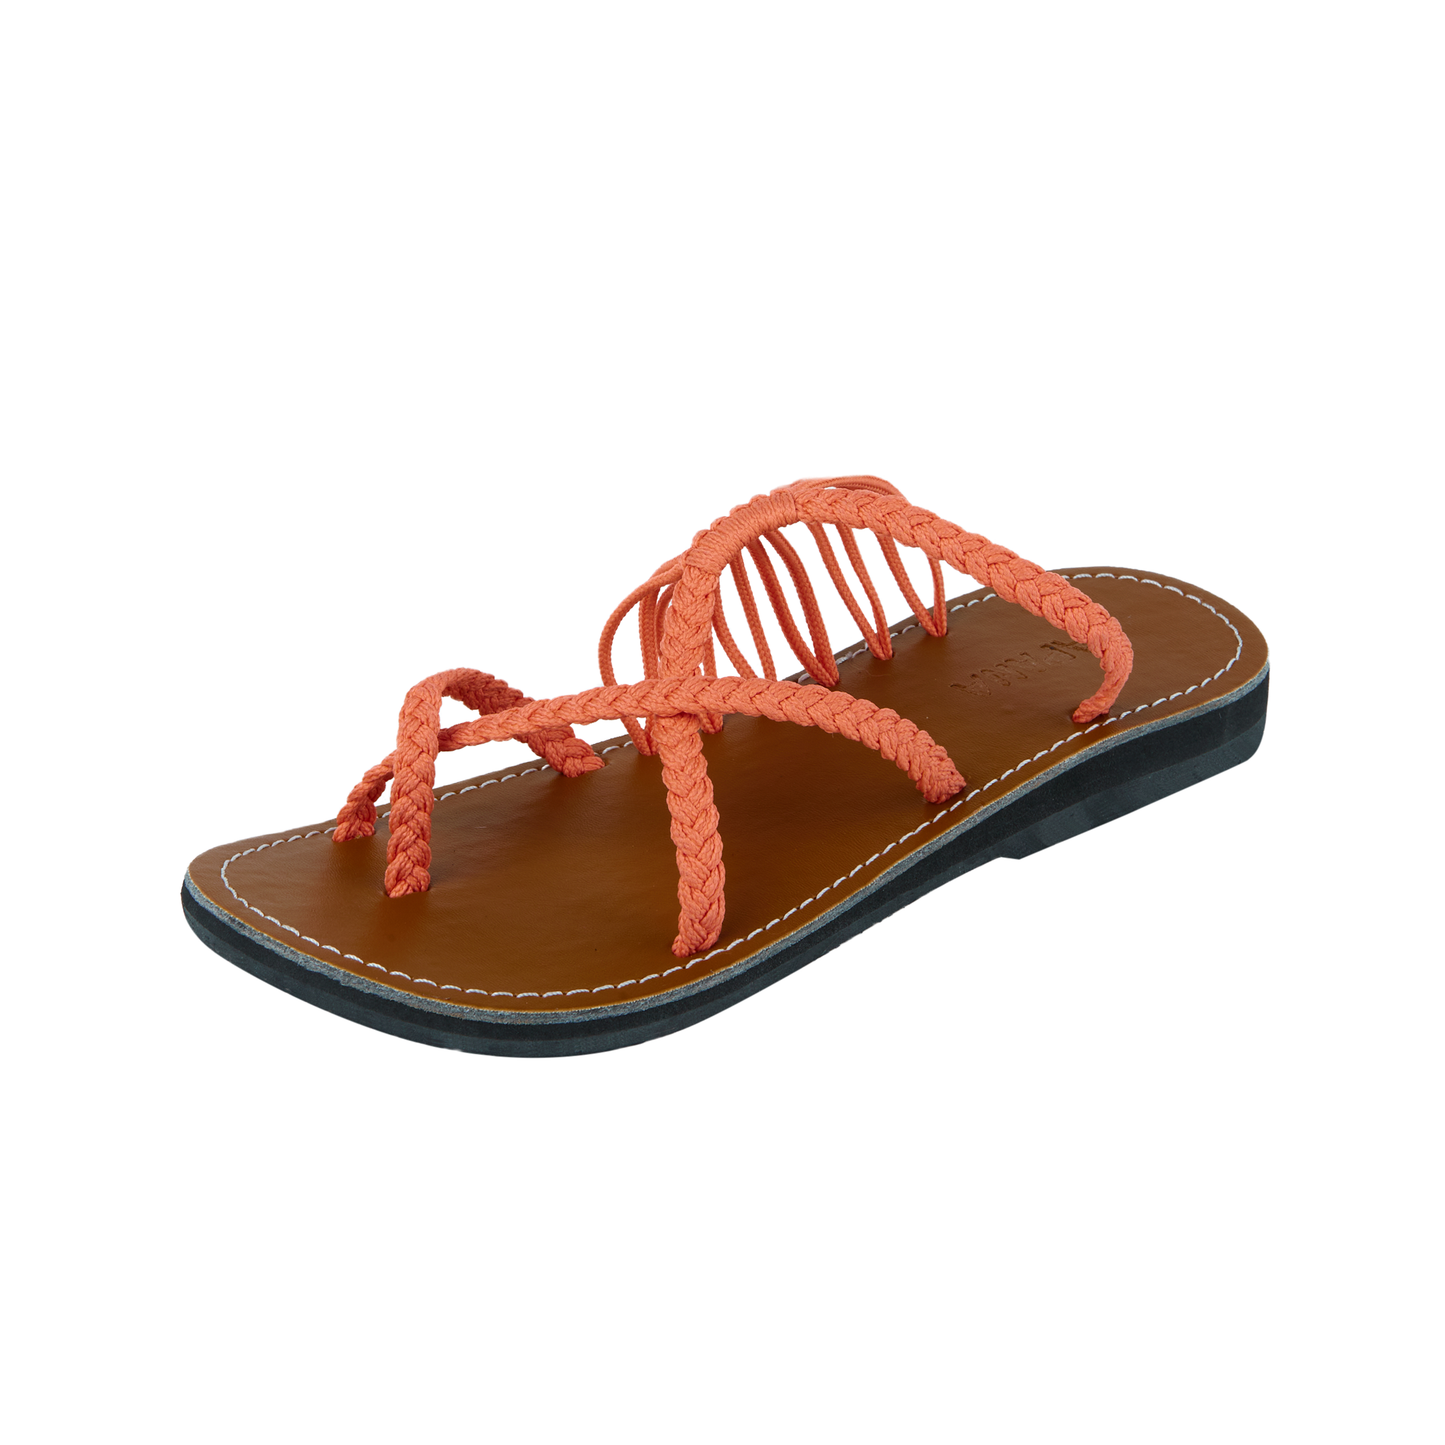 Hand woven sandals Salmon Rope Sandals on the side  in white background